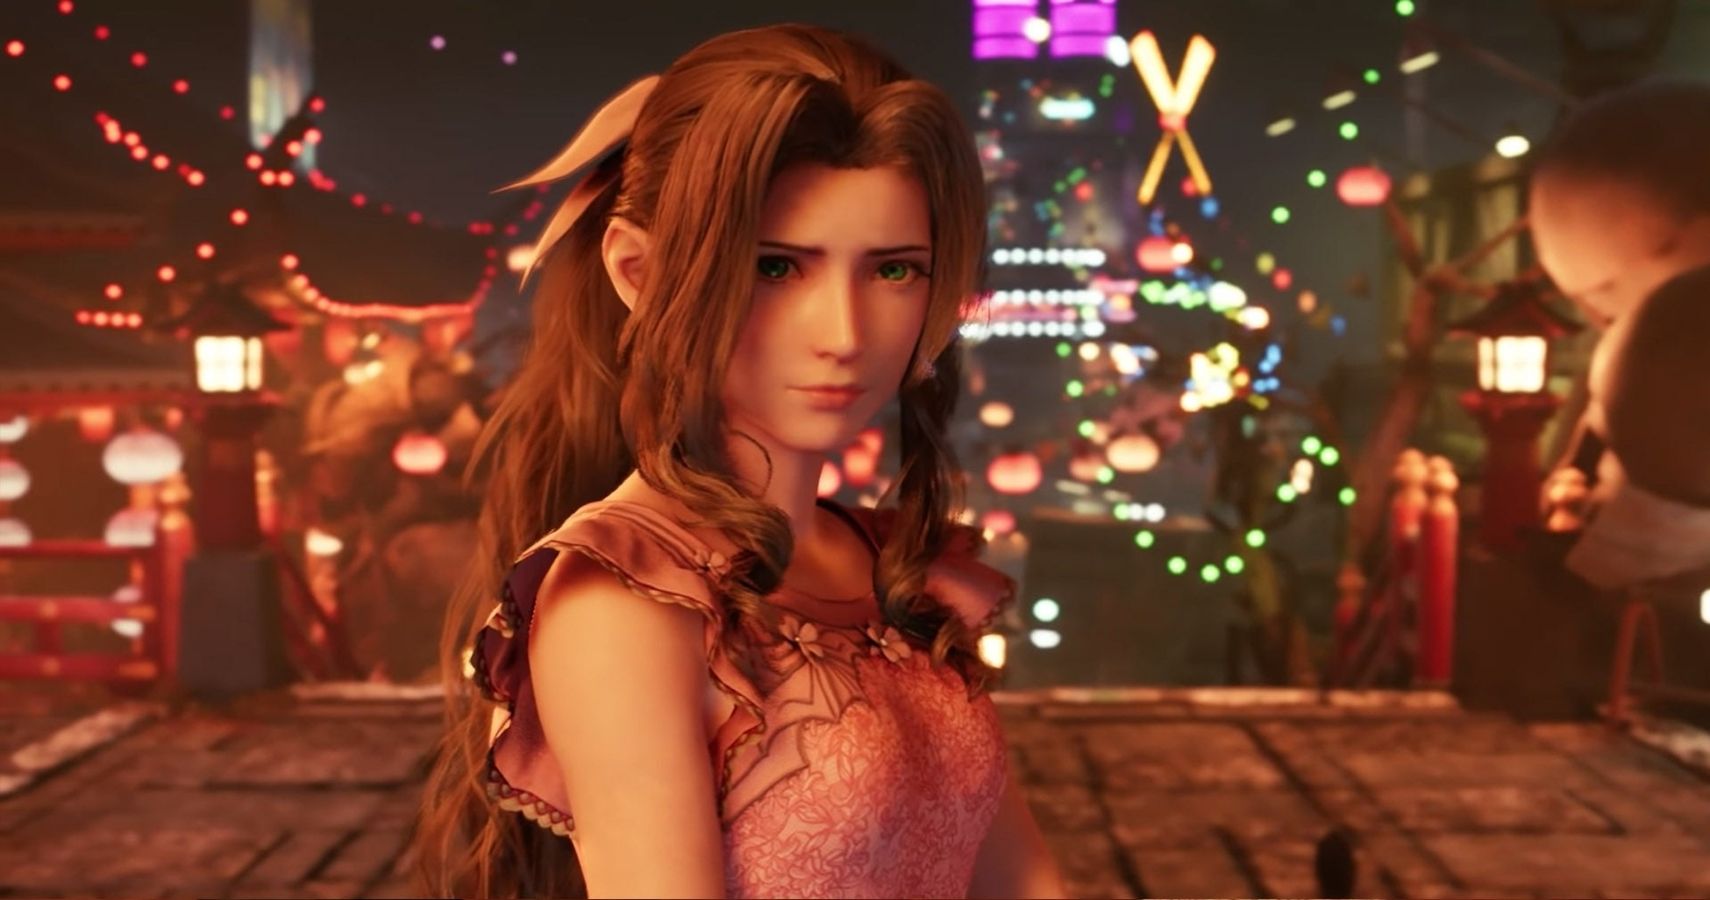 Dear Square Enix: Please Let Aerith Be This Time